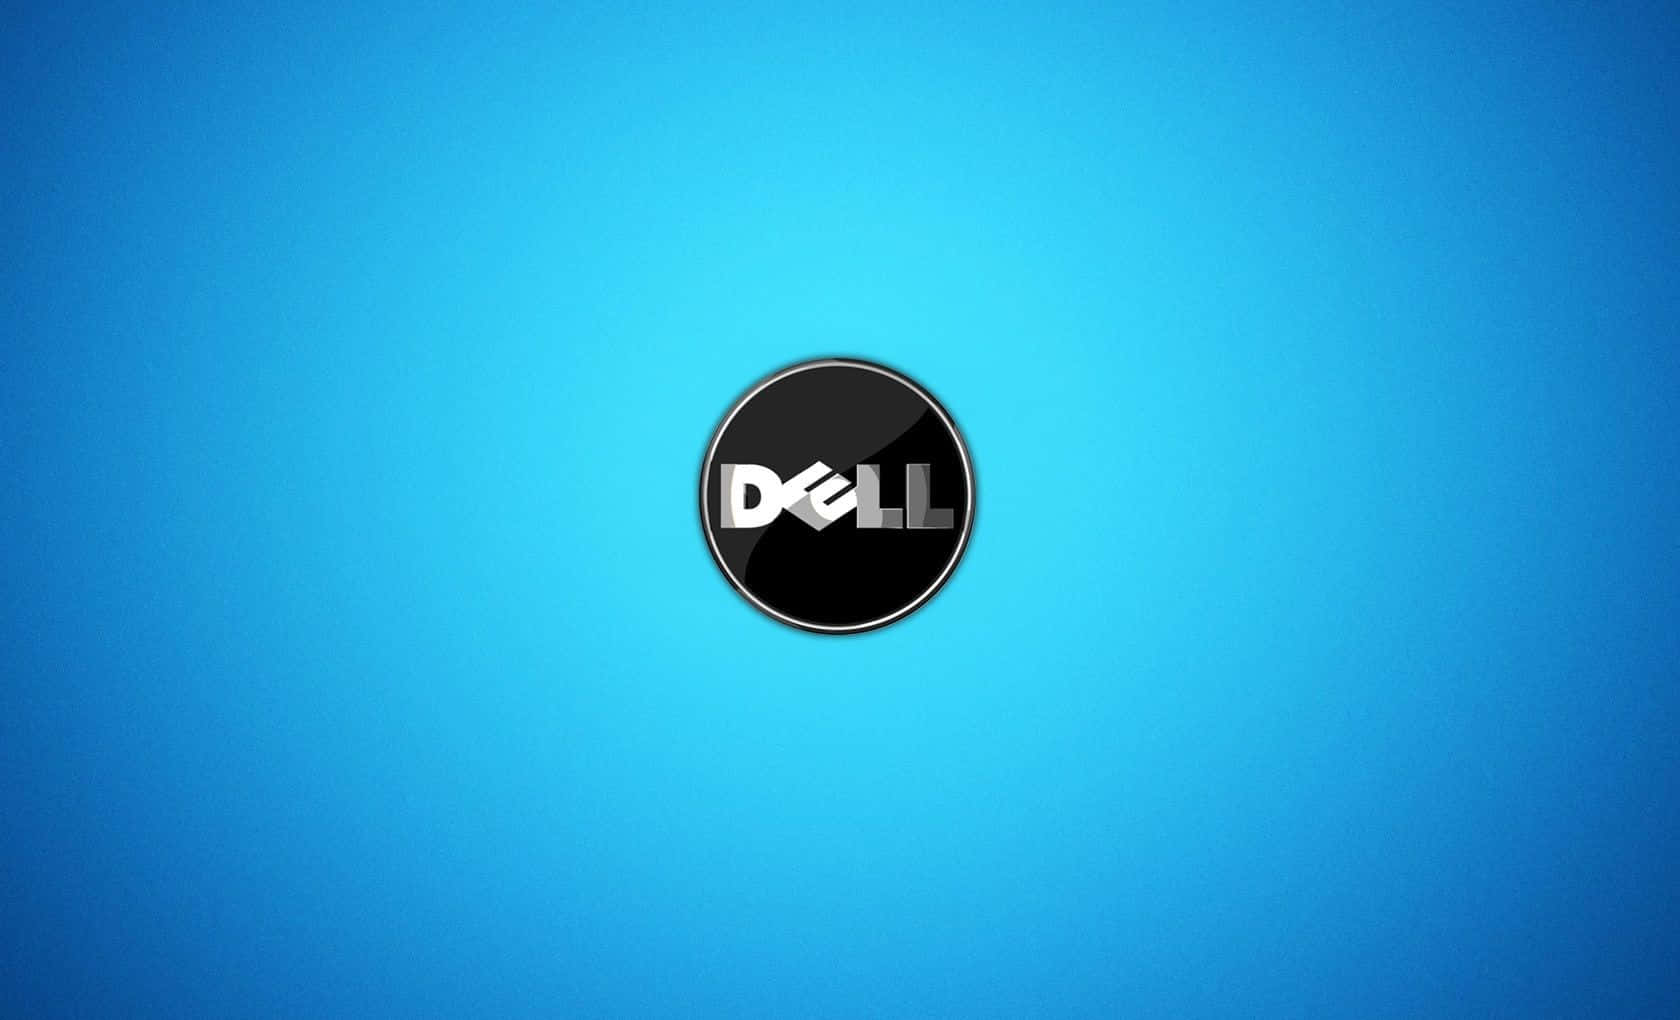 dell logo on a blue background